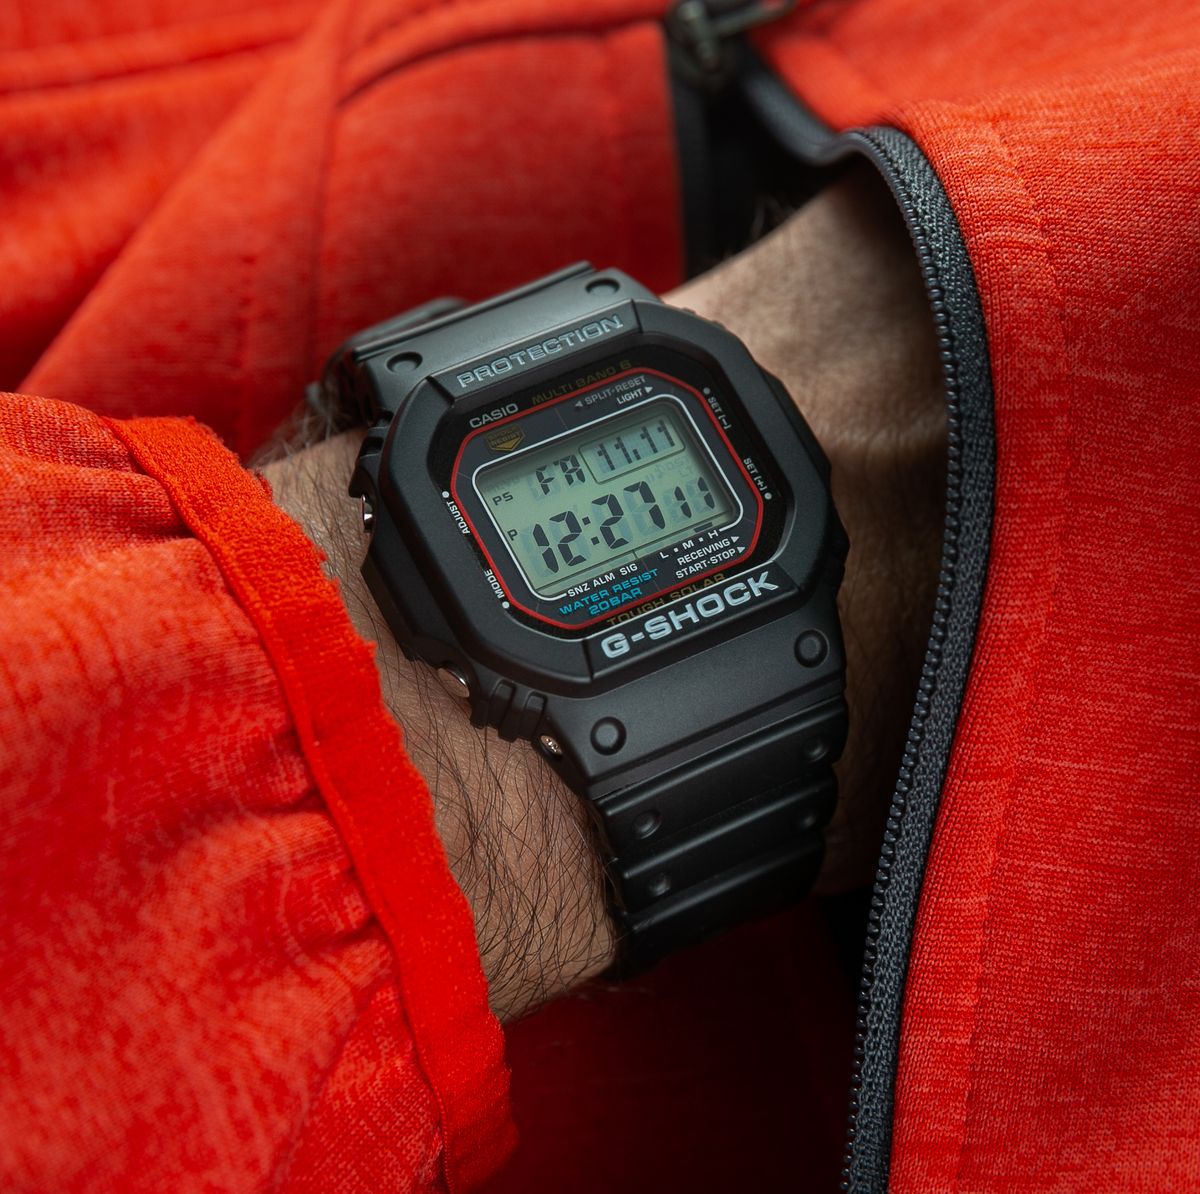 Casio G-Shock Gwm5610-1 Review: The O.G. G-Shock Is Still The Best